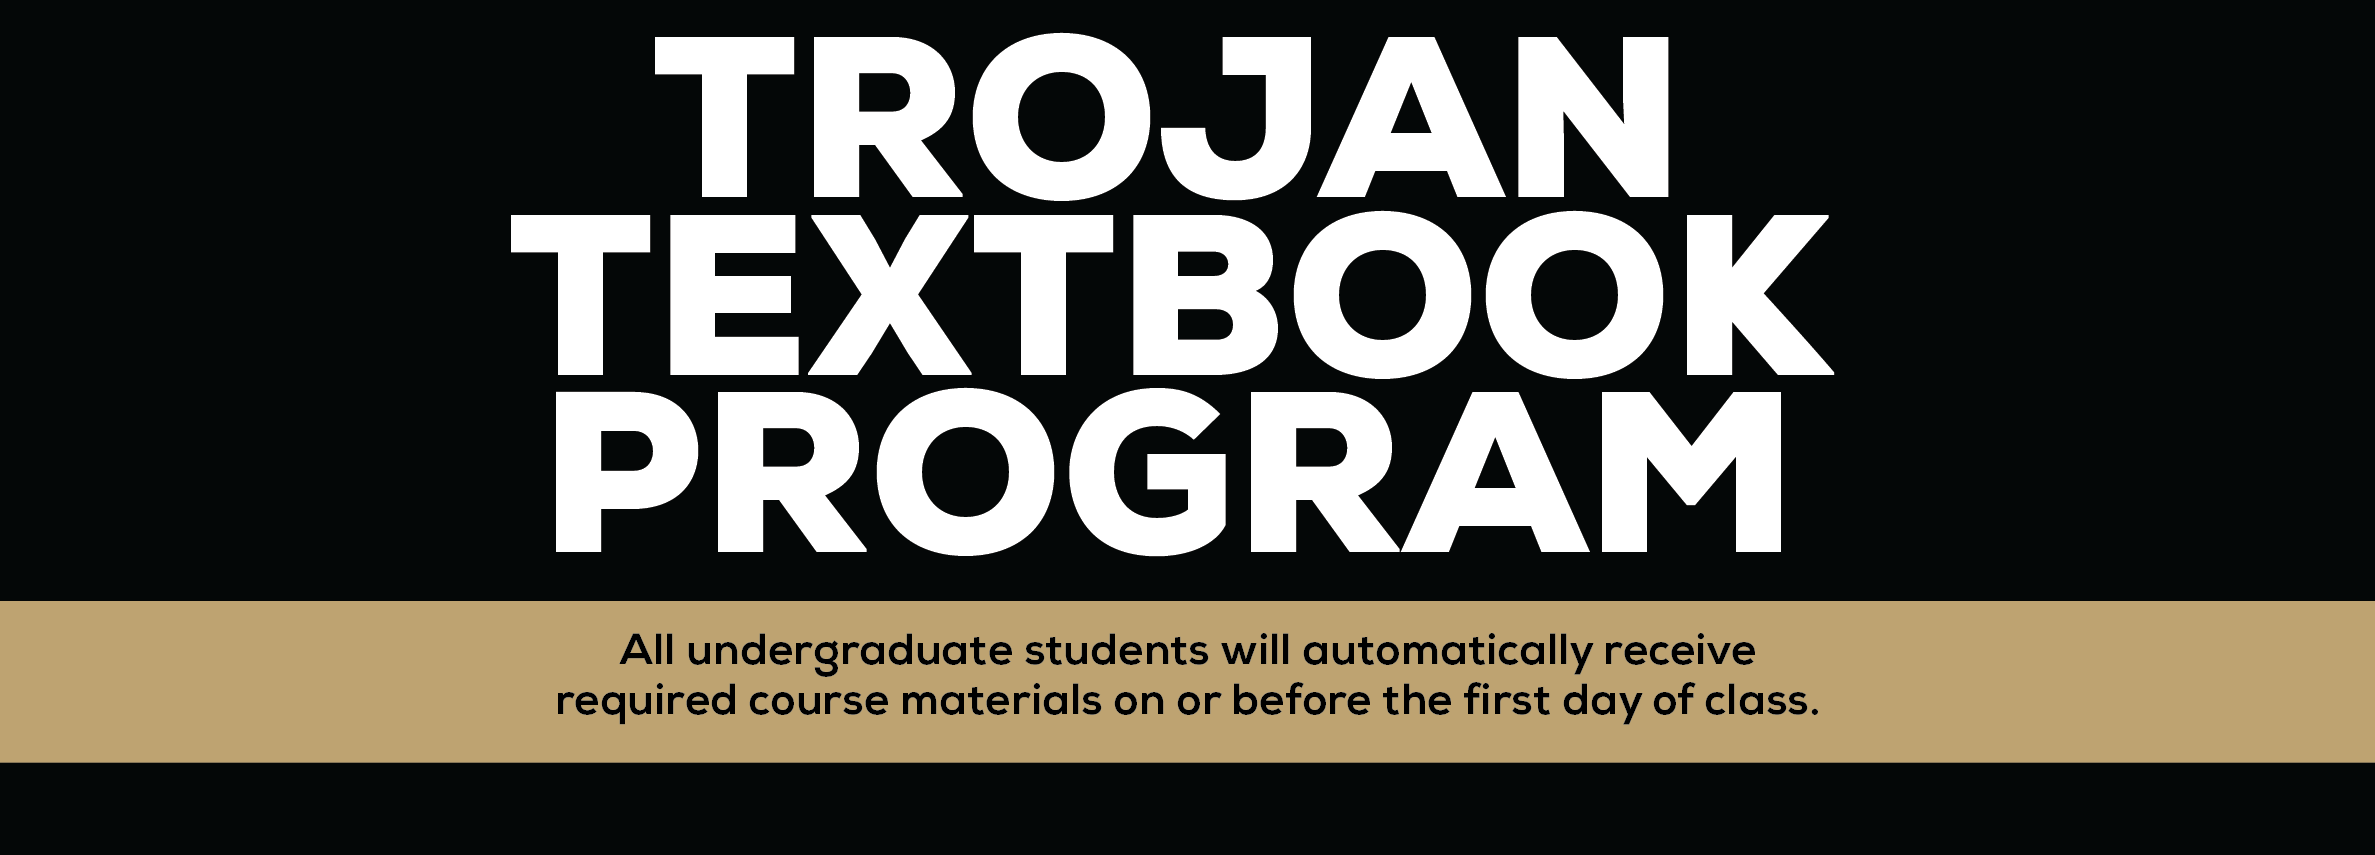 TROJAN TEXTBOOK PROGRAM All undergraduate students will automatically receive required course materials on or before the first day of class. (new tab)